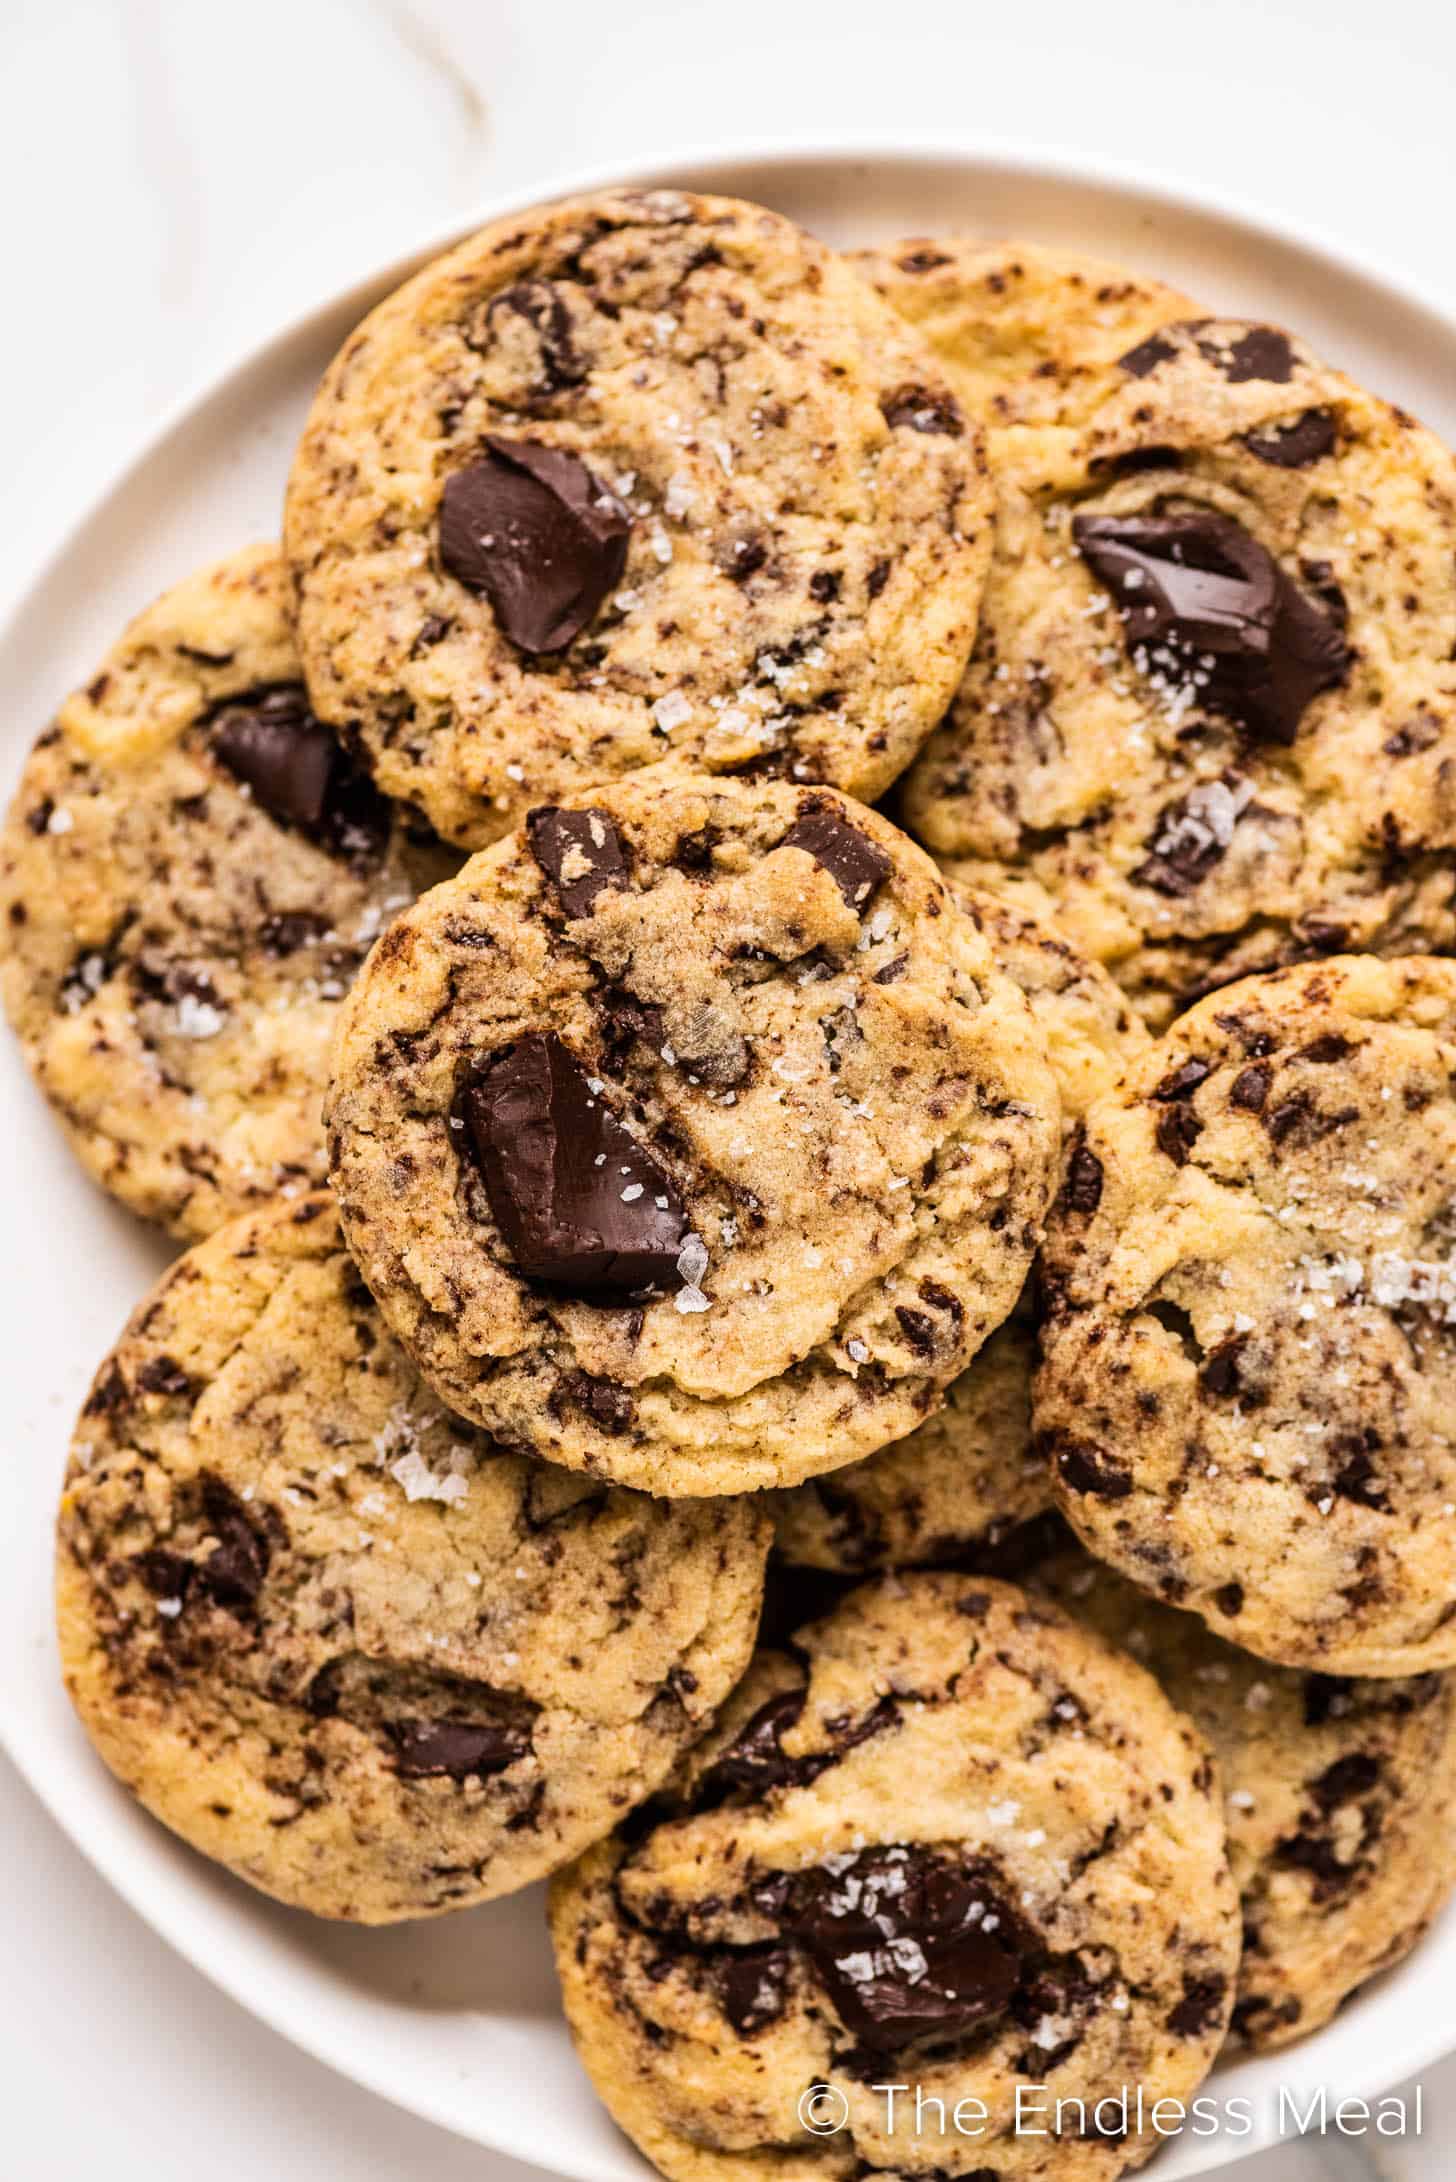 Egg-Free Chocolate Chip Cookies piled high on a plate